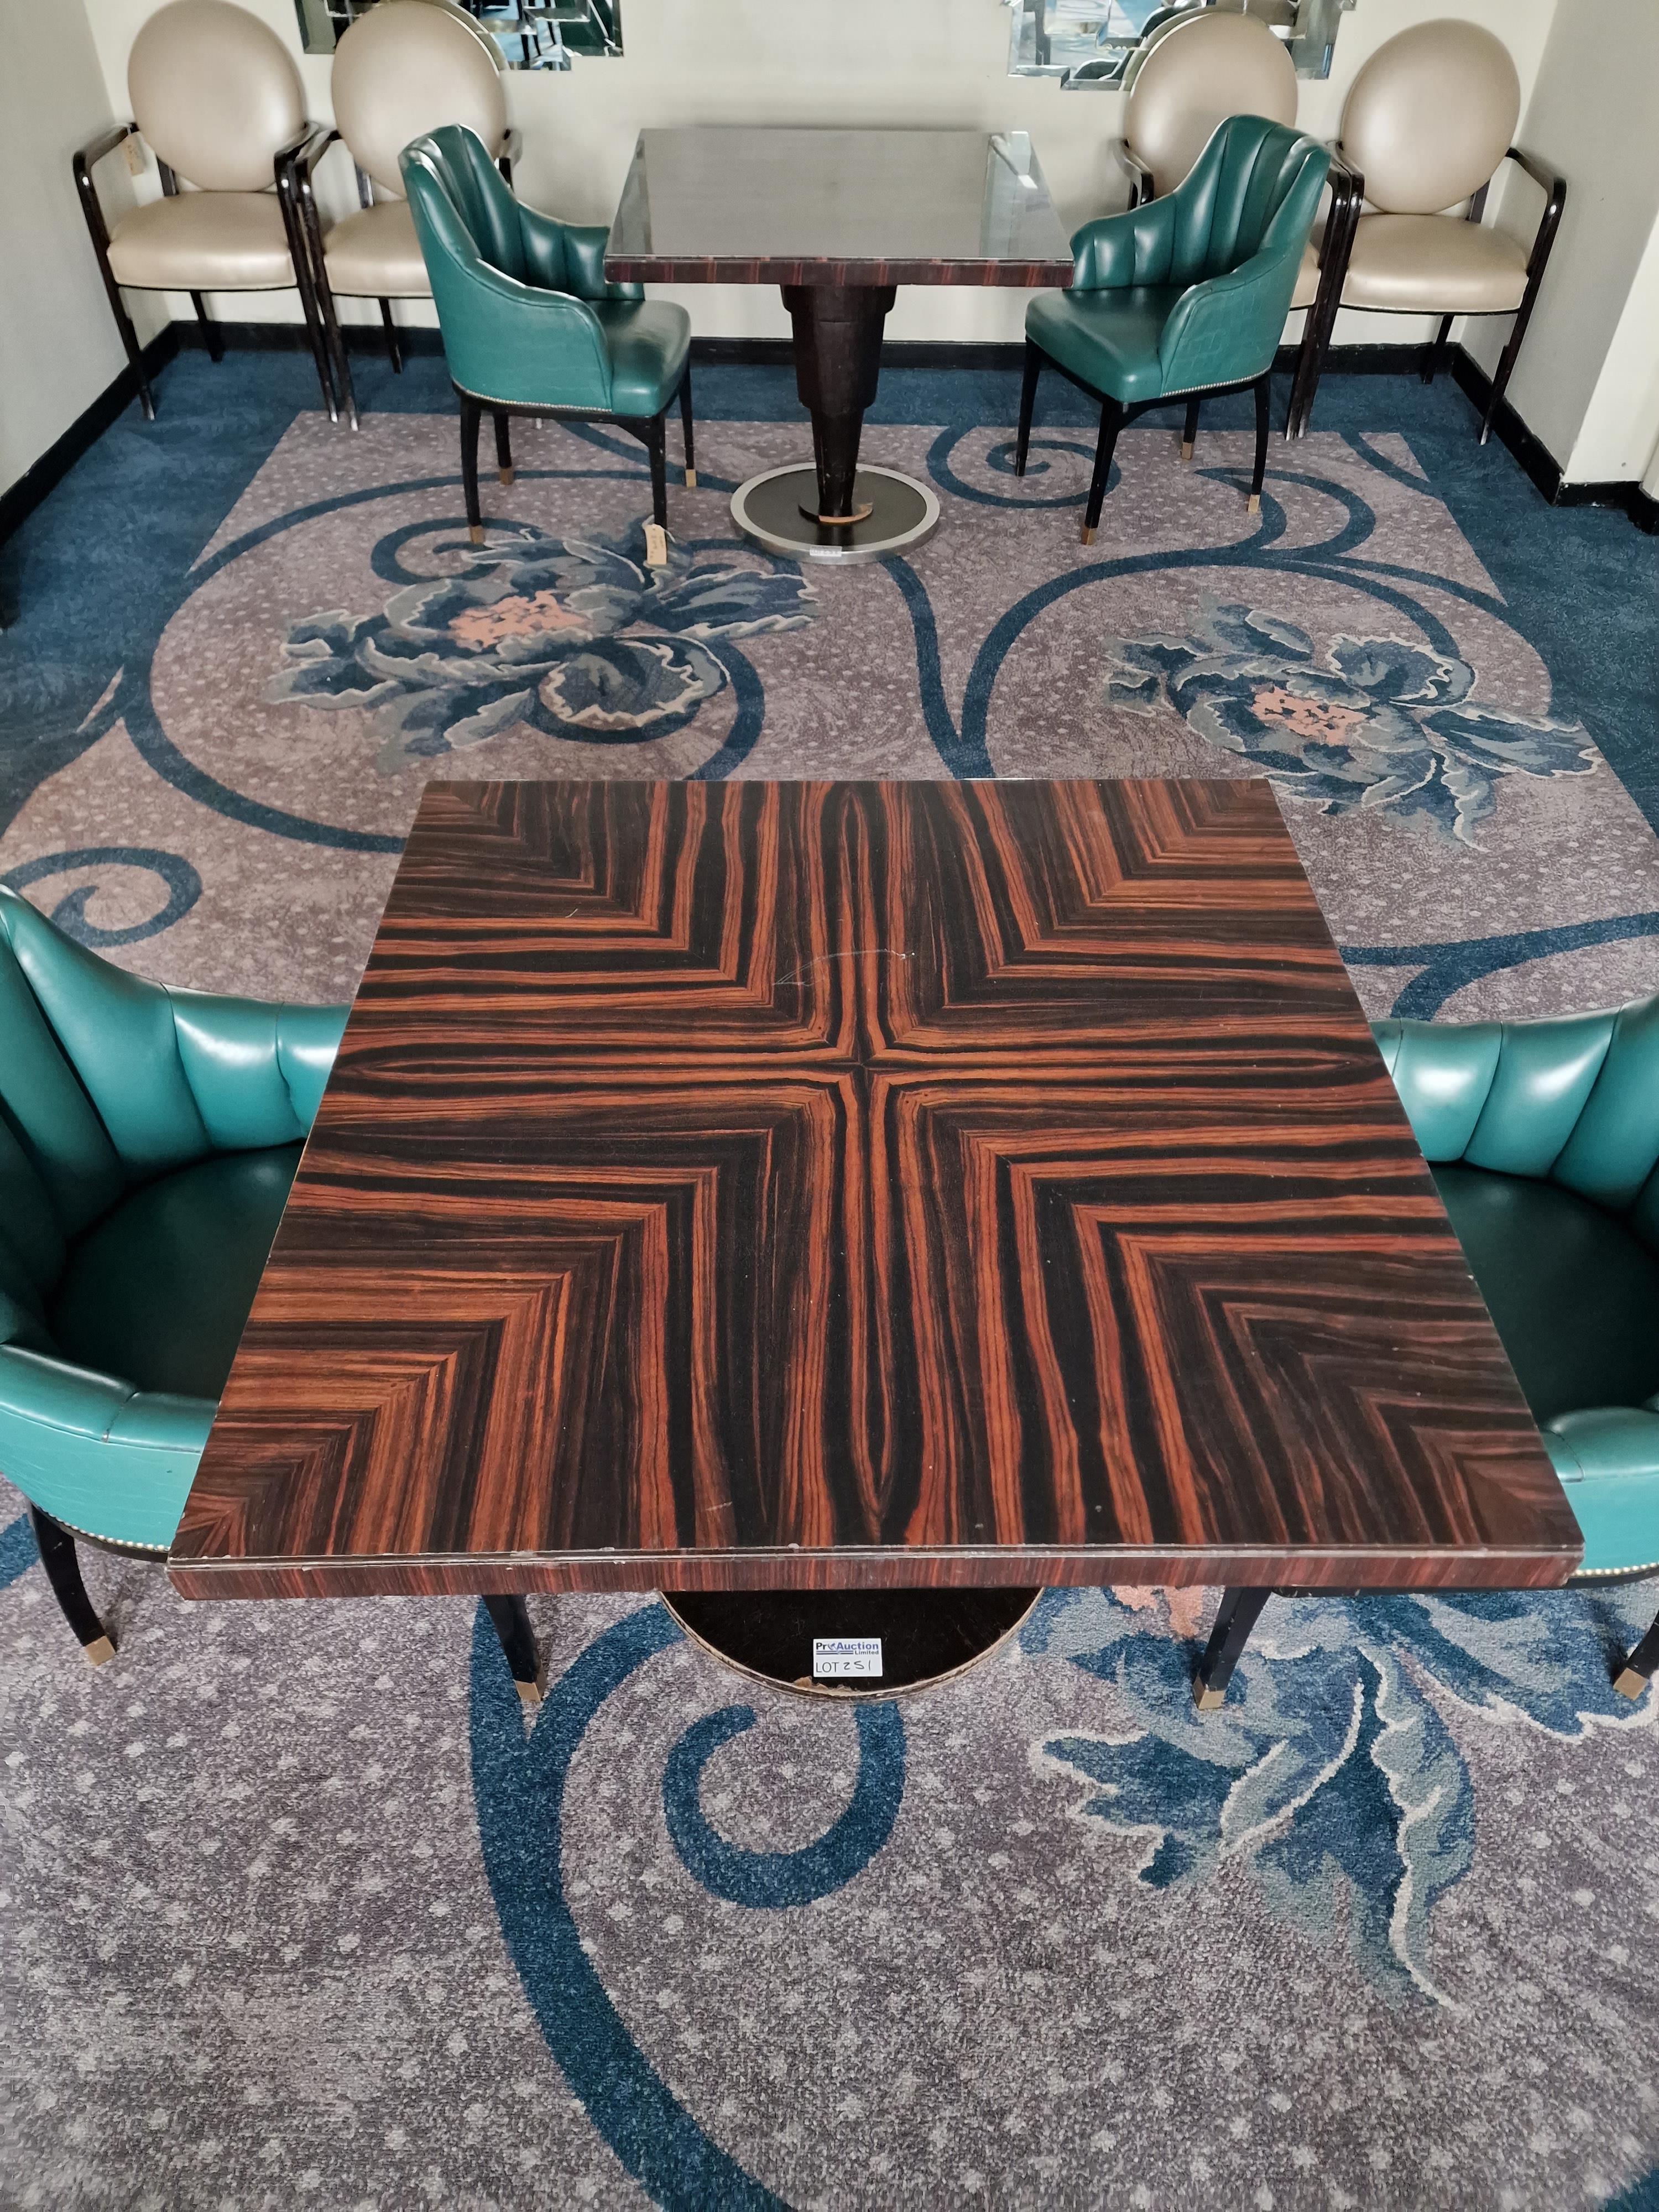 Square dining table art deco style macassar ebony and palm veneer on solid timber frame mounted on a - Image 3 of 4